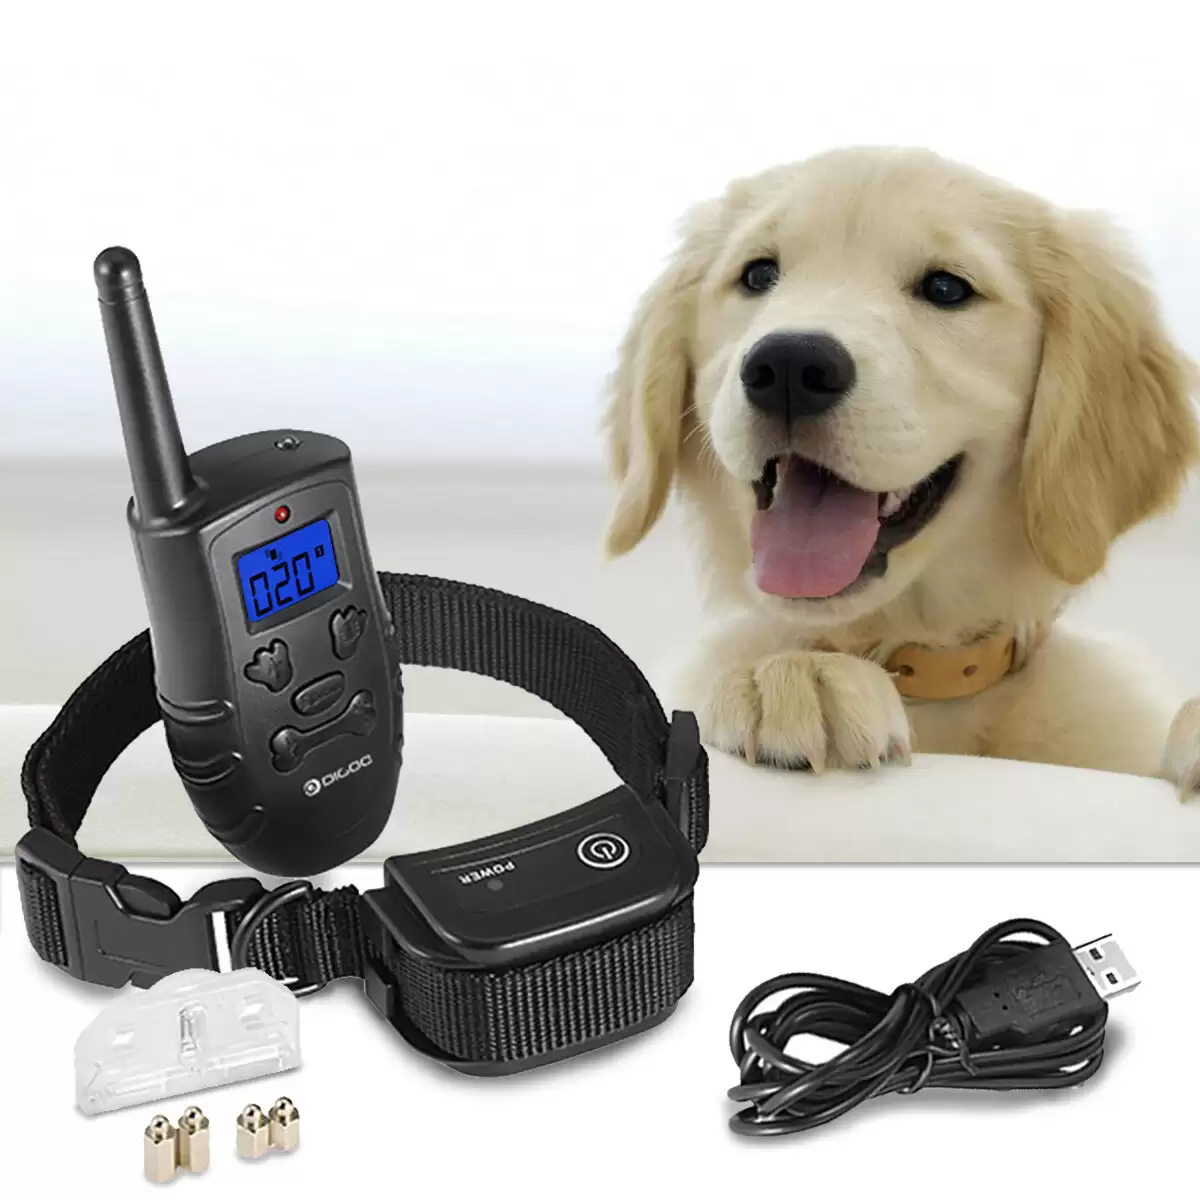 Order In Just $23.99 Digoo Dg-ppt1 Pet Dog Rechargeable Trainer Waterproof Stop Barking Collars Remote Dog Training Collar With This Coupon At Banggood